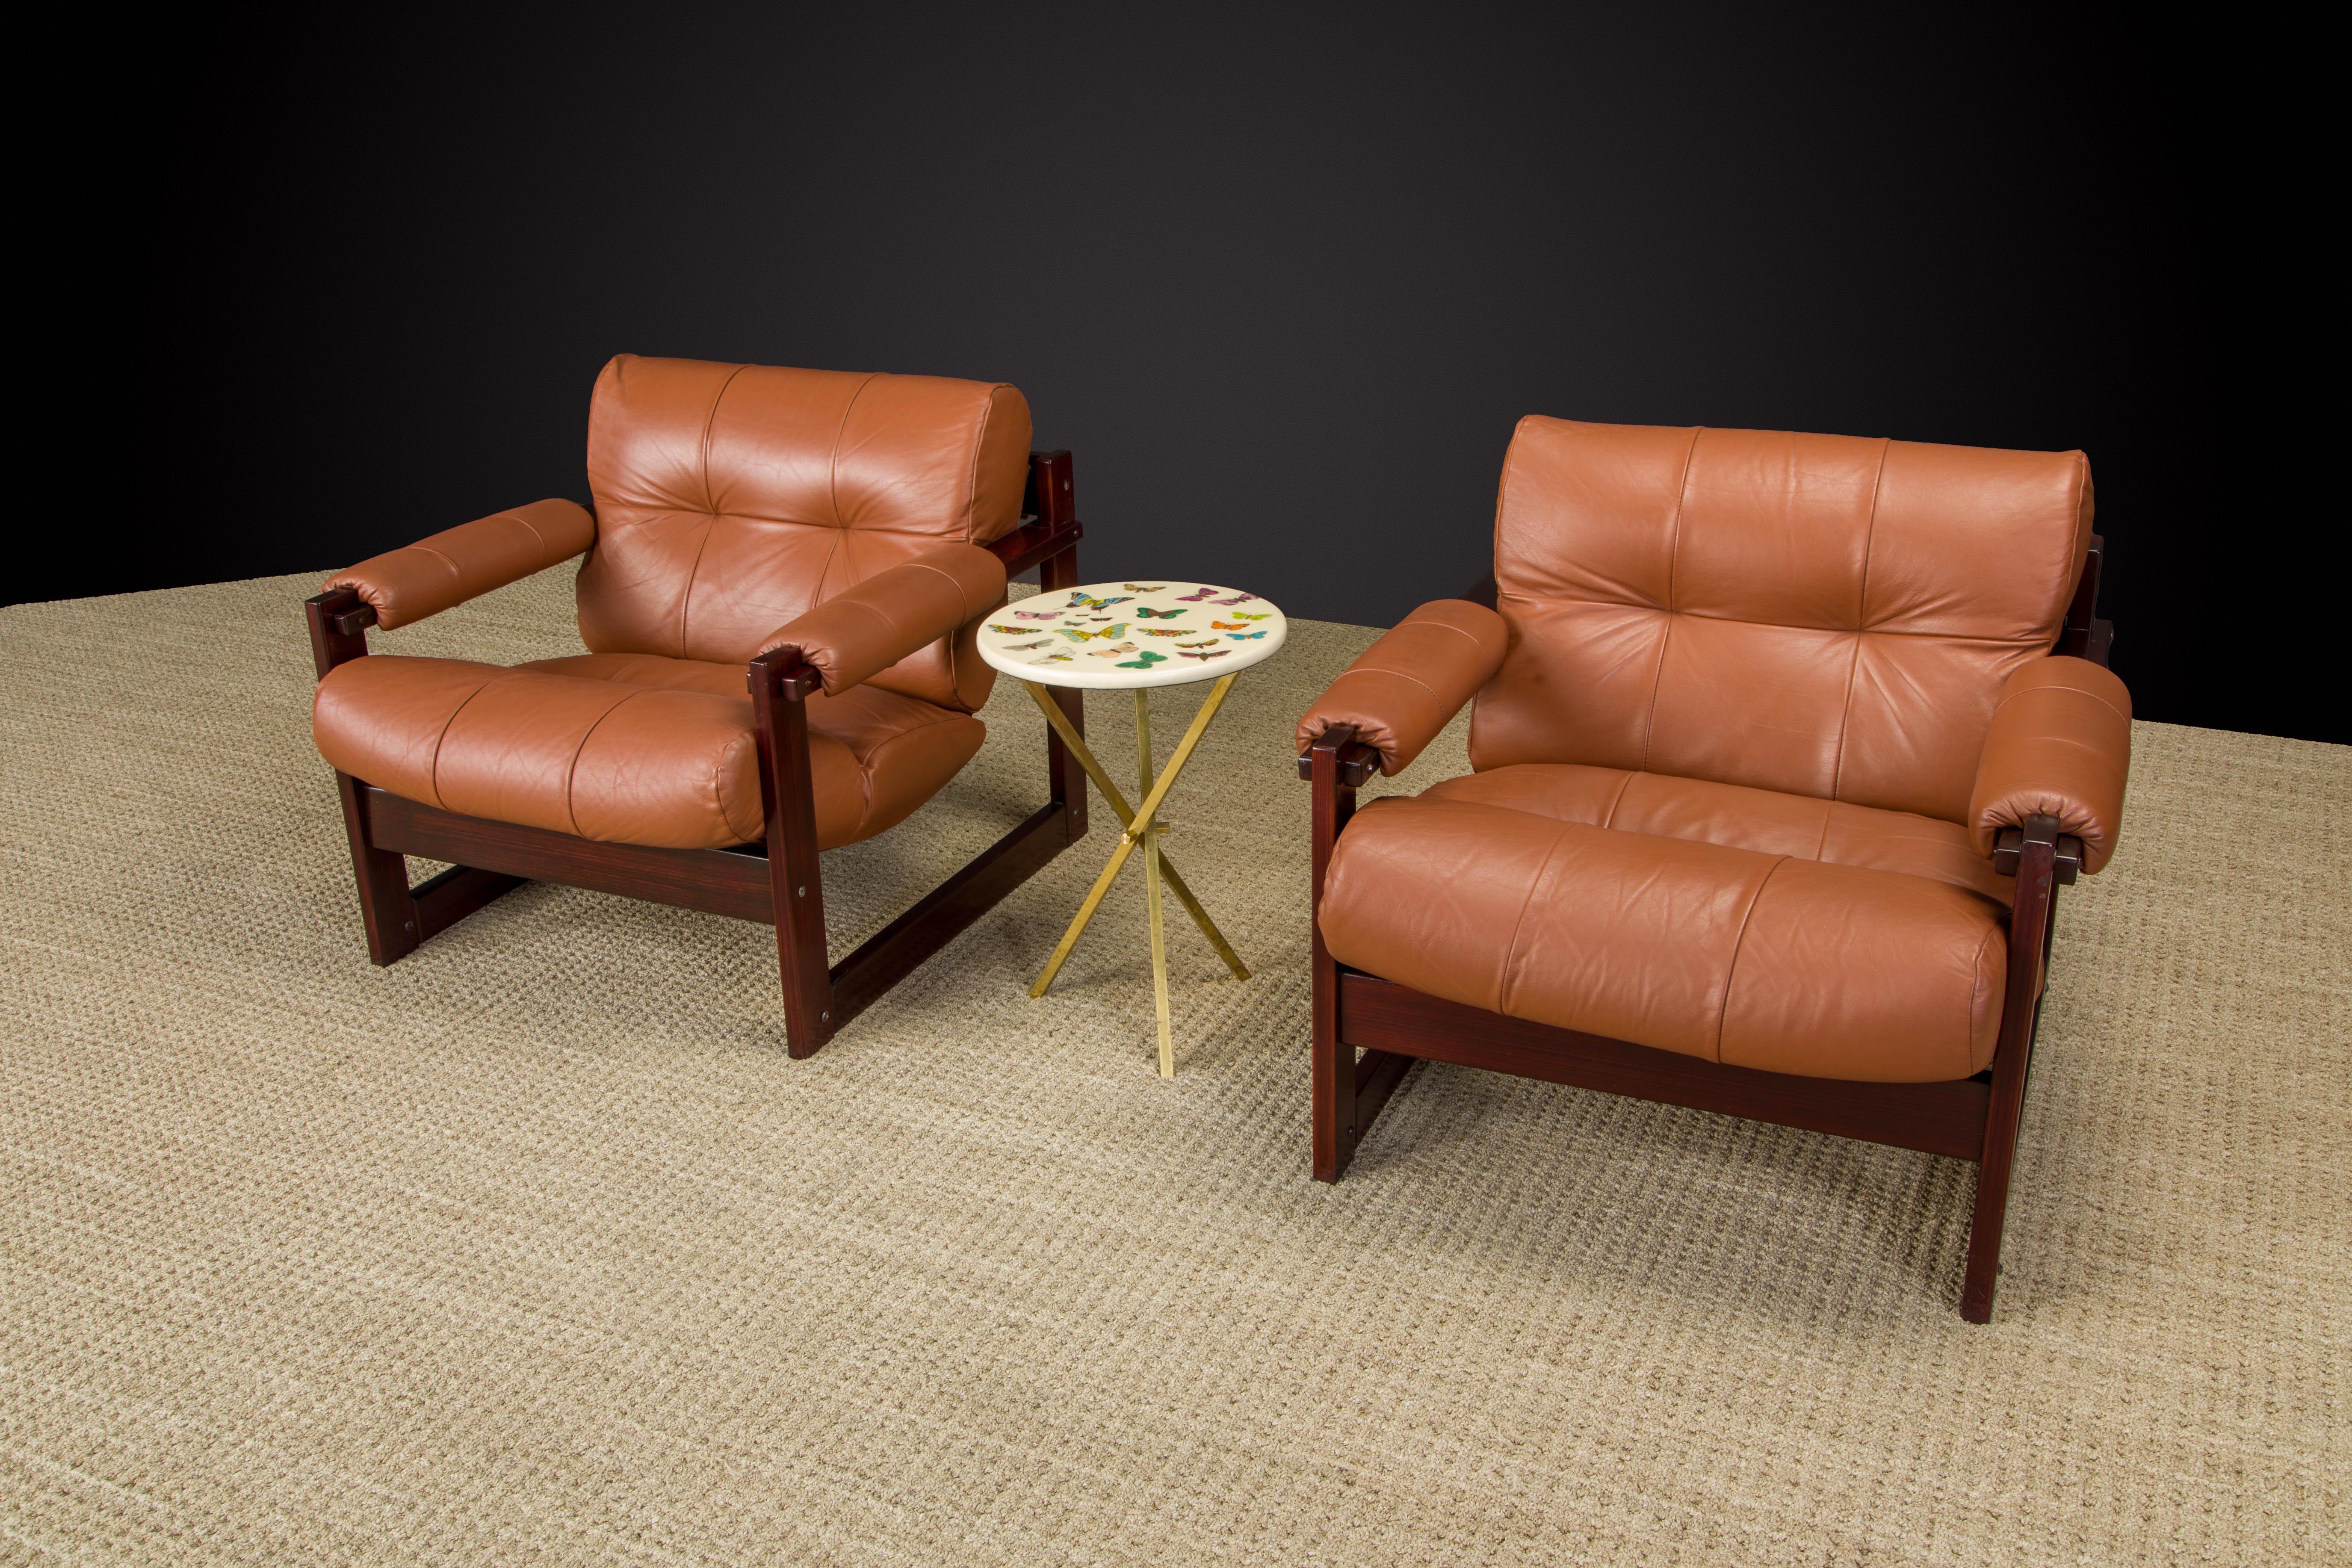 Brazilian Percival Lafer 'S-1' Rosewood and Leather Lounge Chairs, Brazil, 1976, Signed For Sale